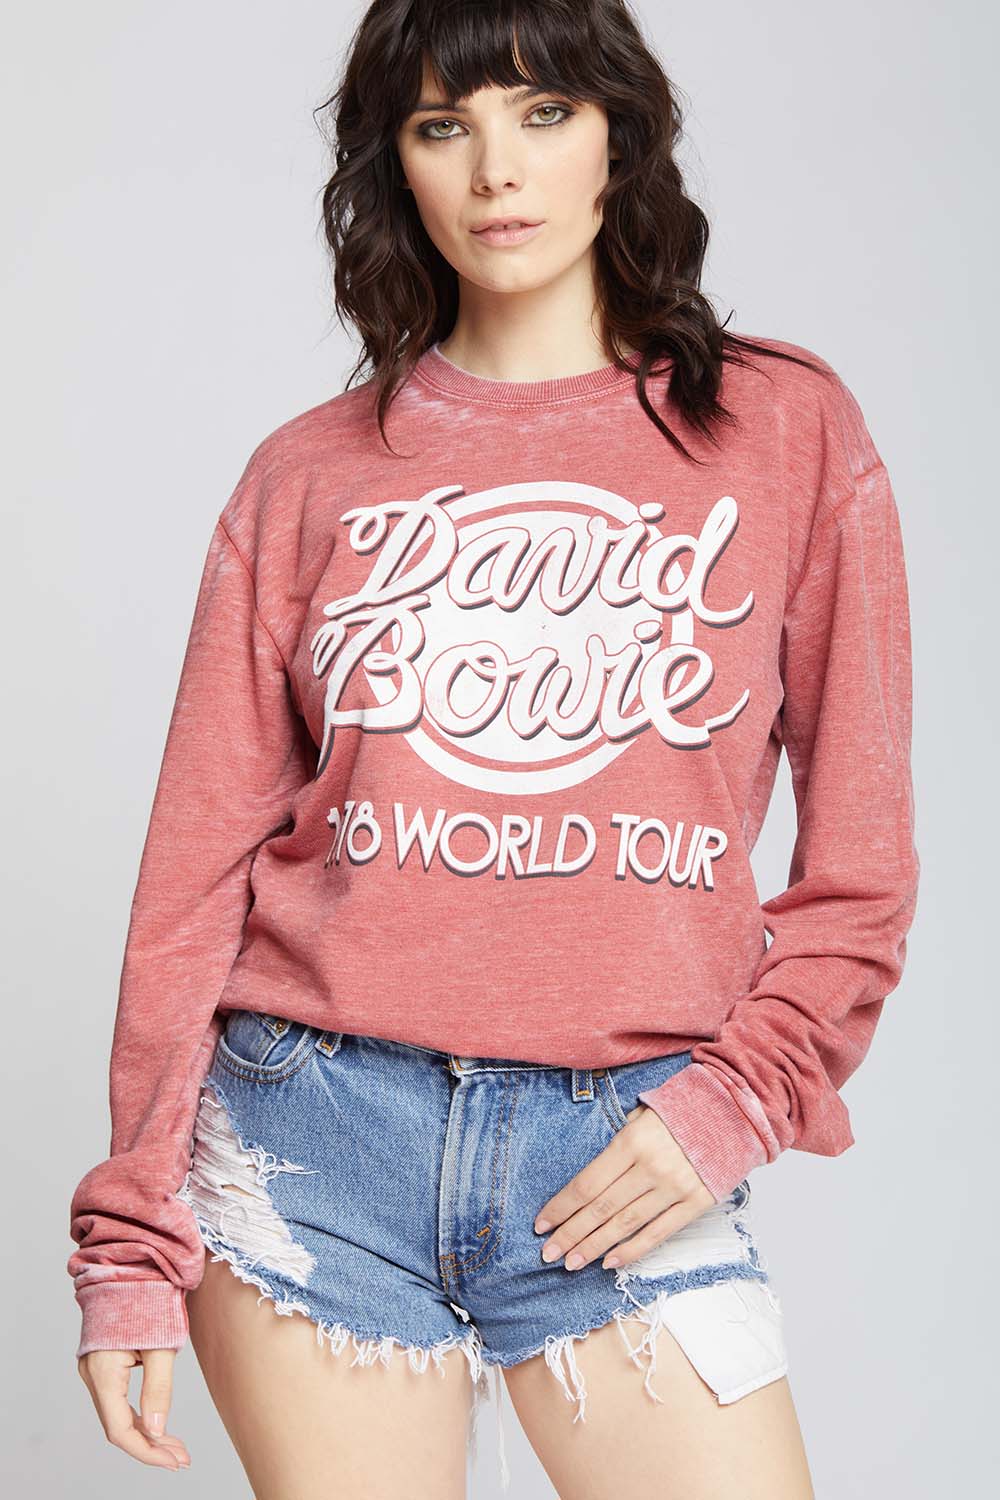 David Bowie 1978 World Tour Fitted Sweatshirt by Recycled Karma Brands